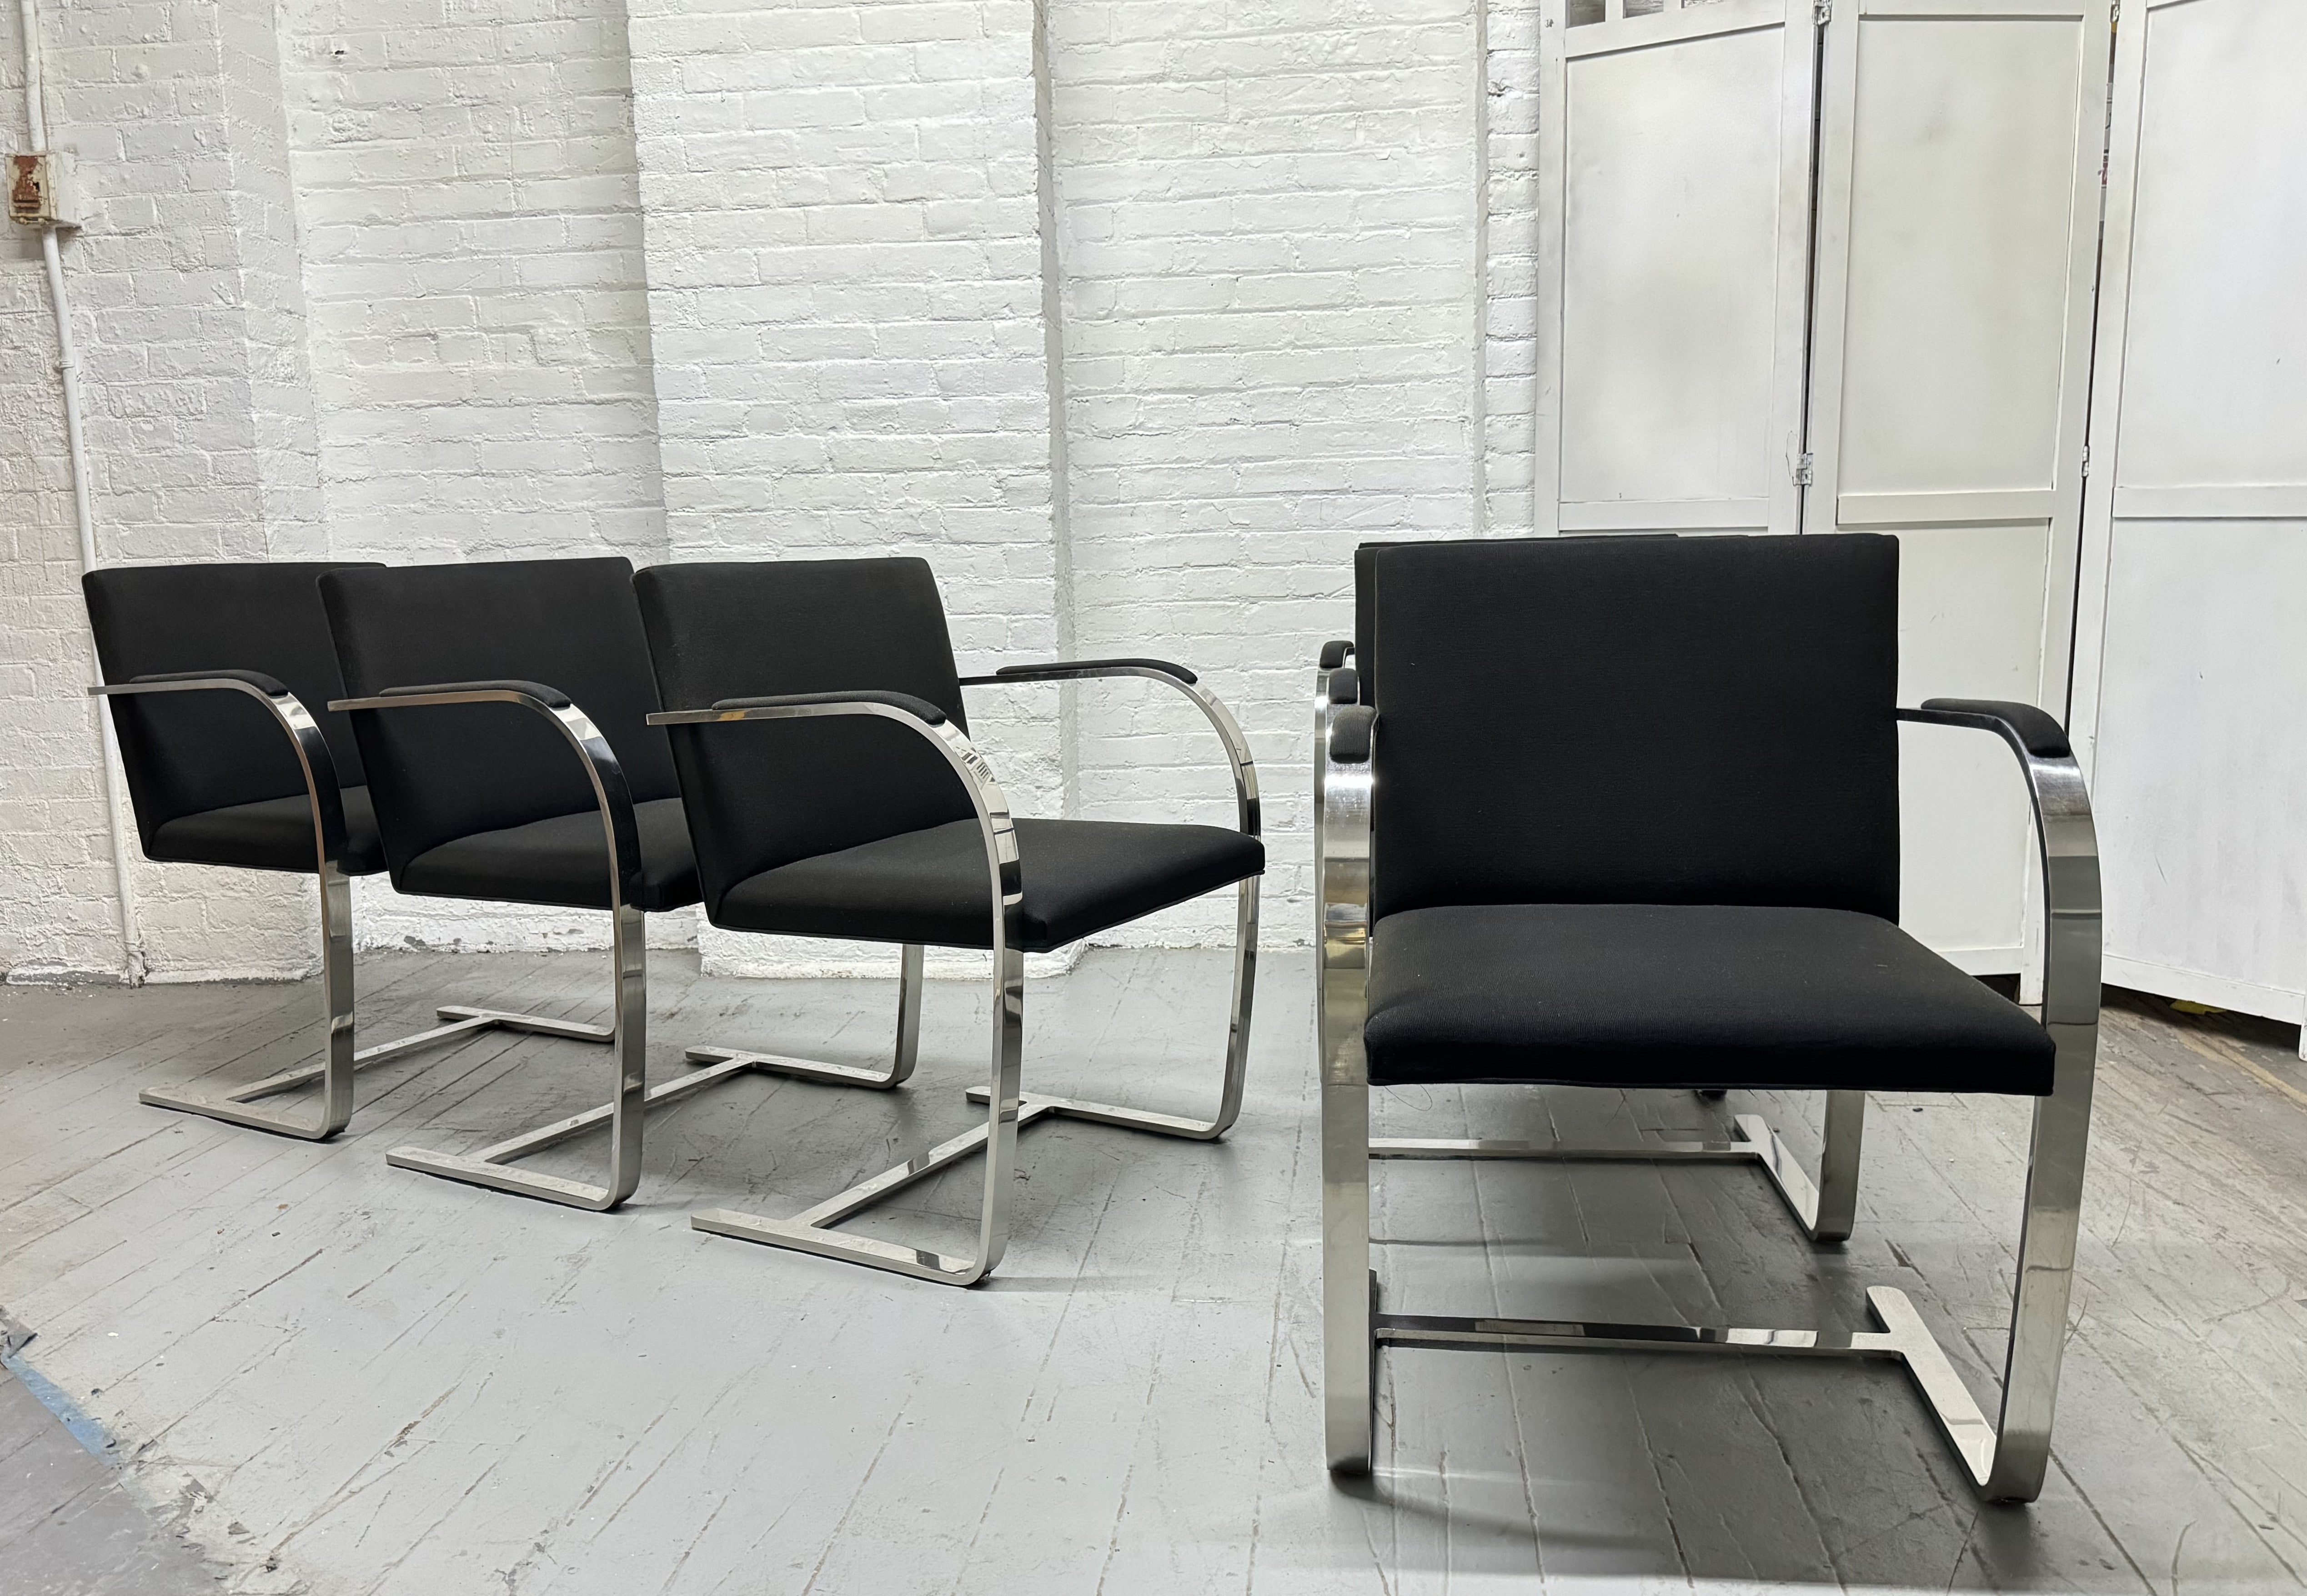 Set of 6 Mies Van Der Rohe BRNO Flat Bar Chairs for Knoll International.  The chairs have chromed steel frames with upholstered seats and padded arms.  